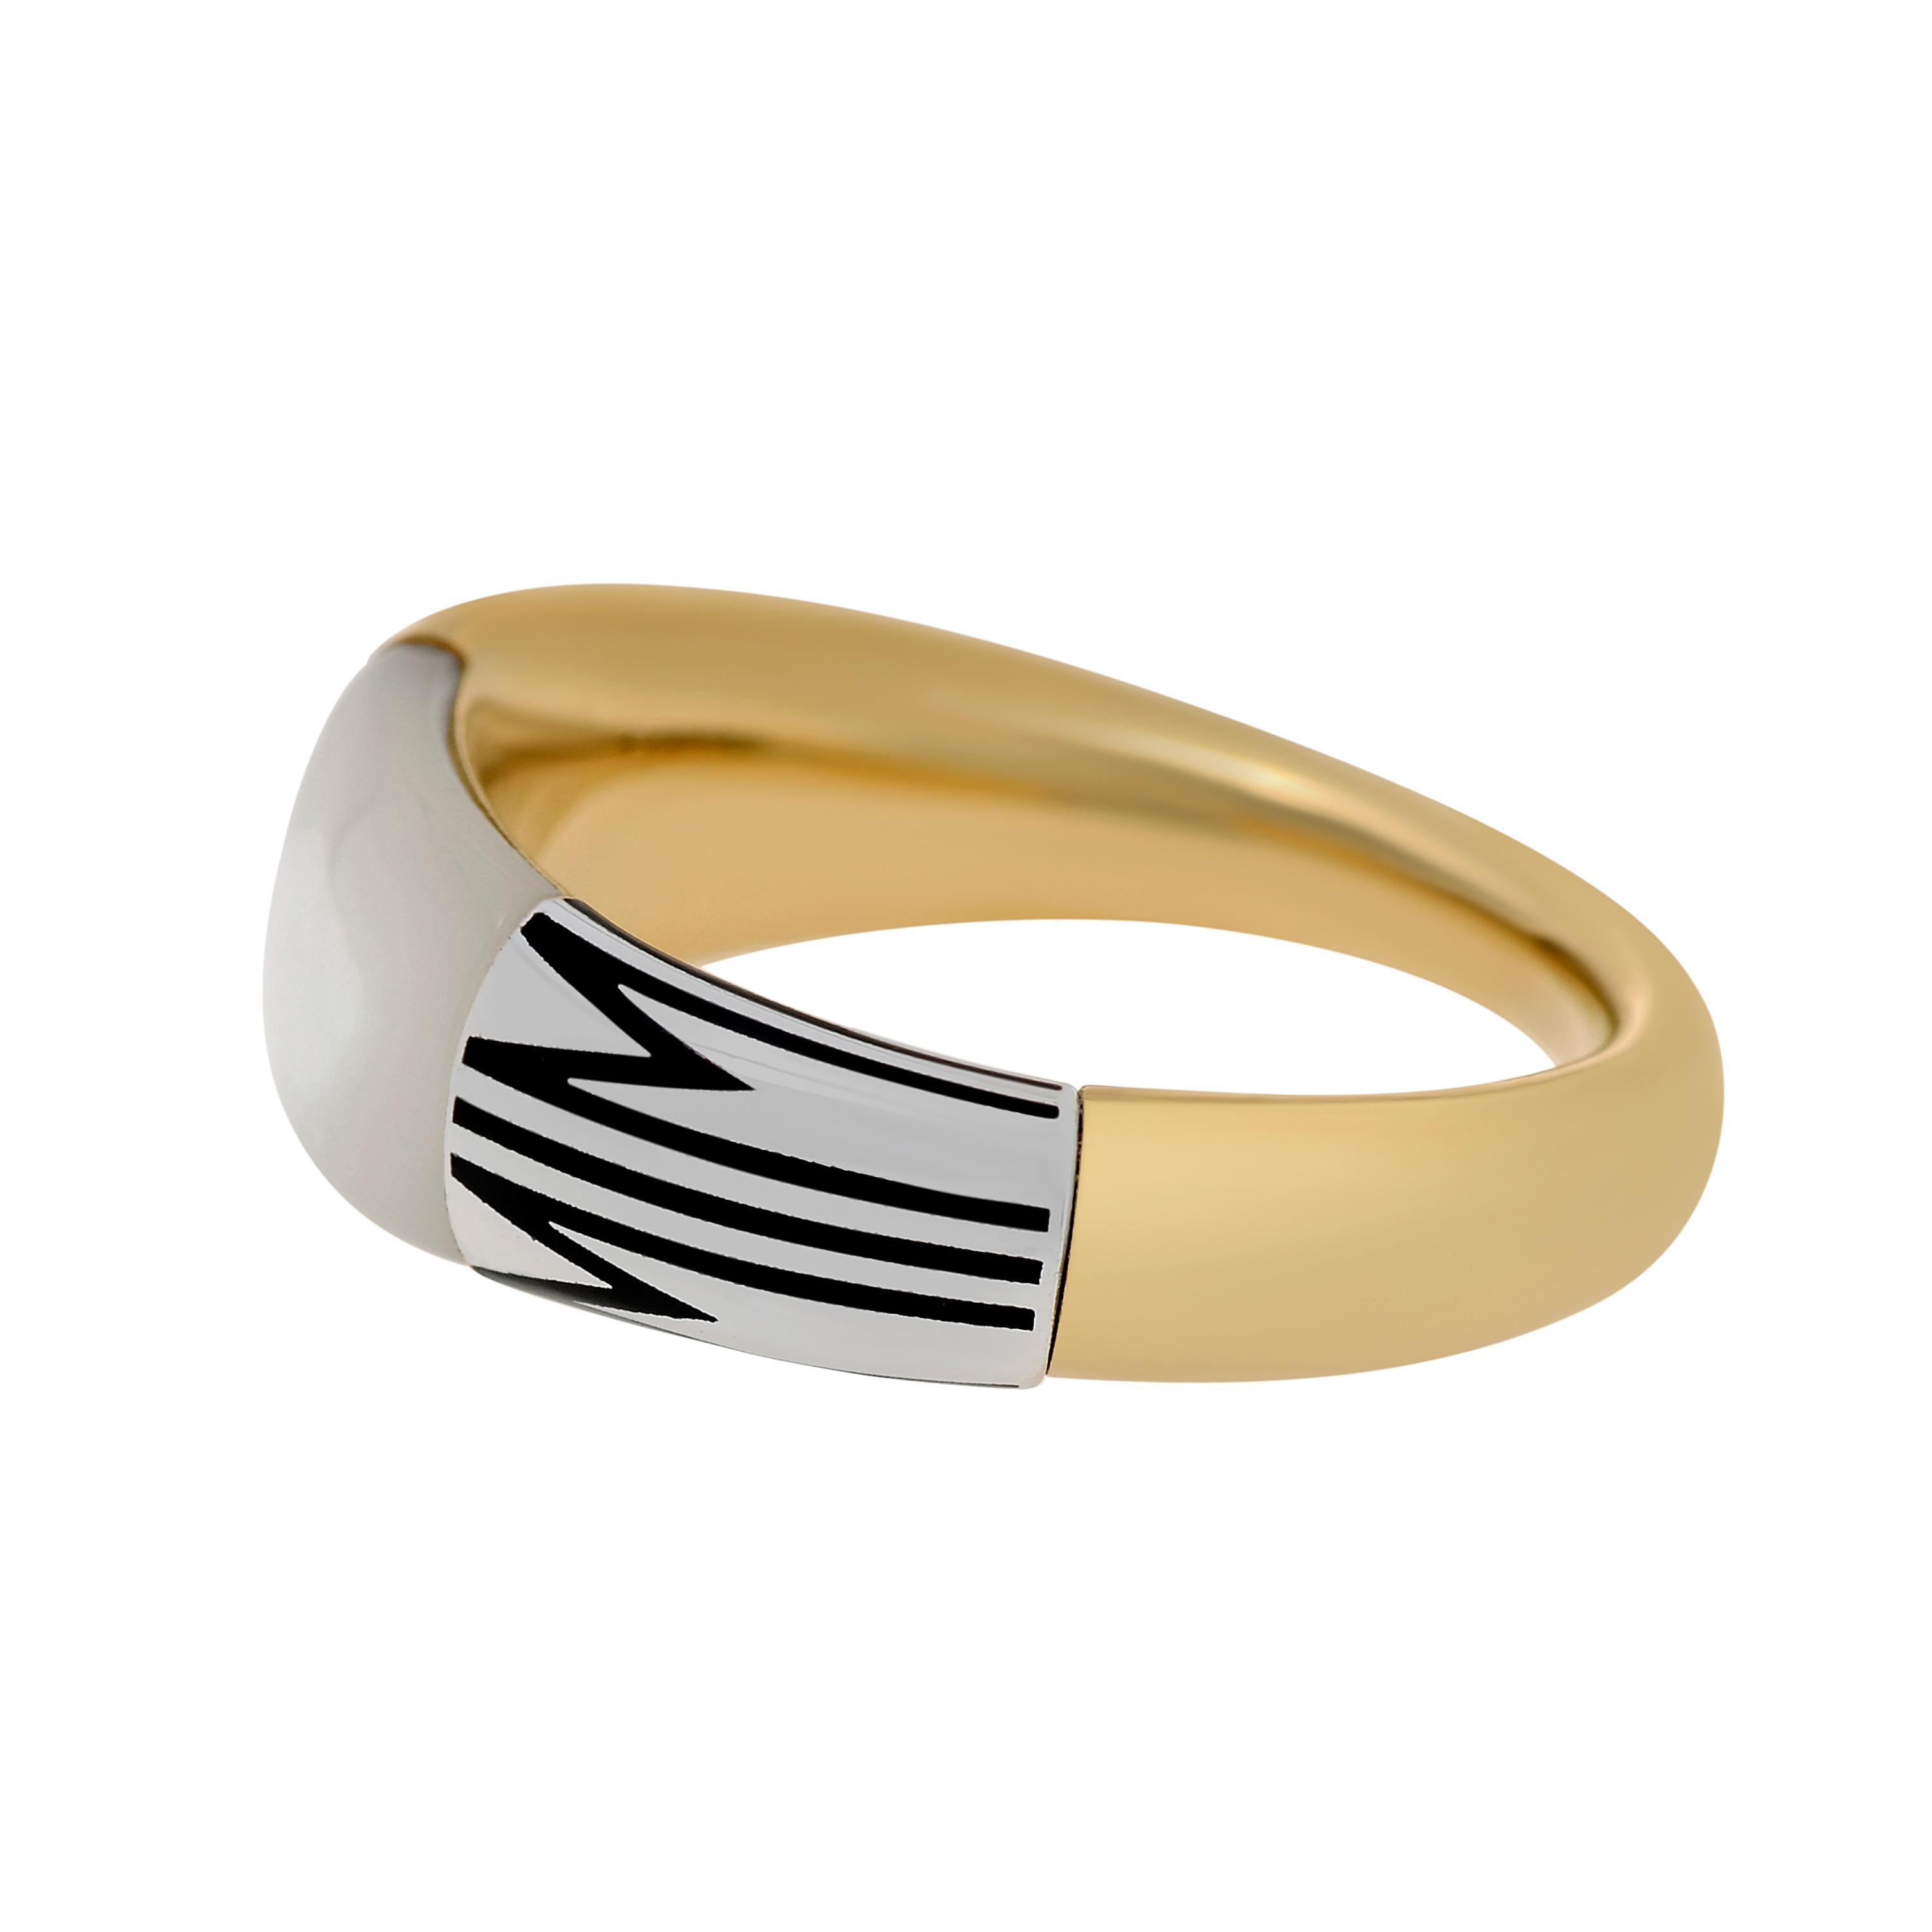 Contemporary Mimi Milano Tam Tam 18K Yellow & White Gold, MoP Ring sz 6.5 For Sale